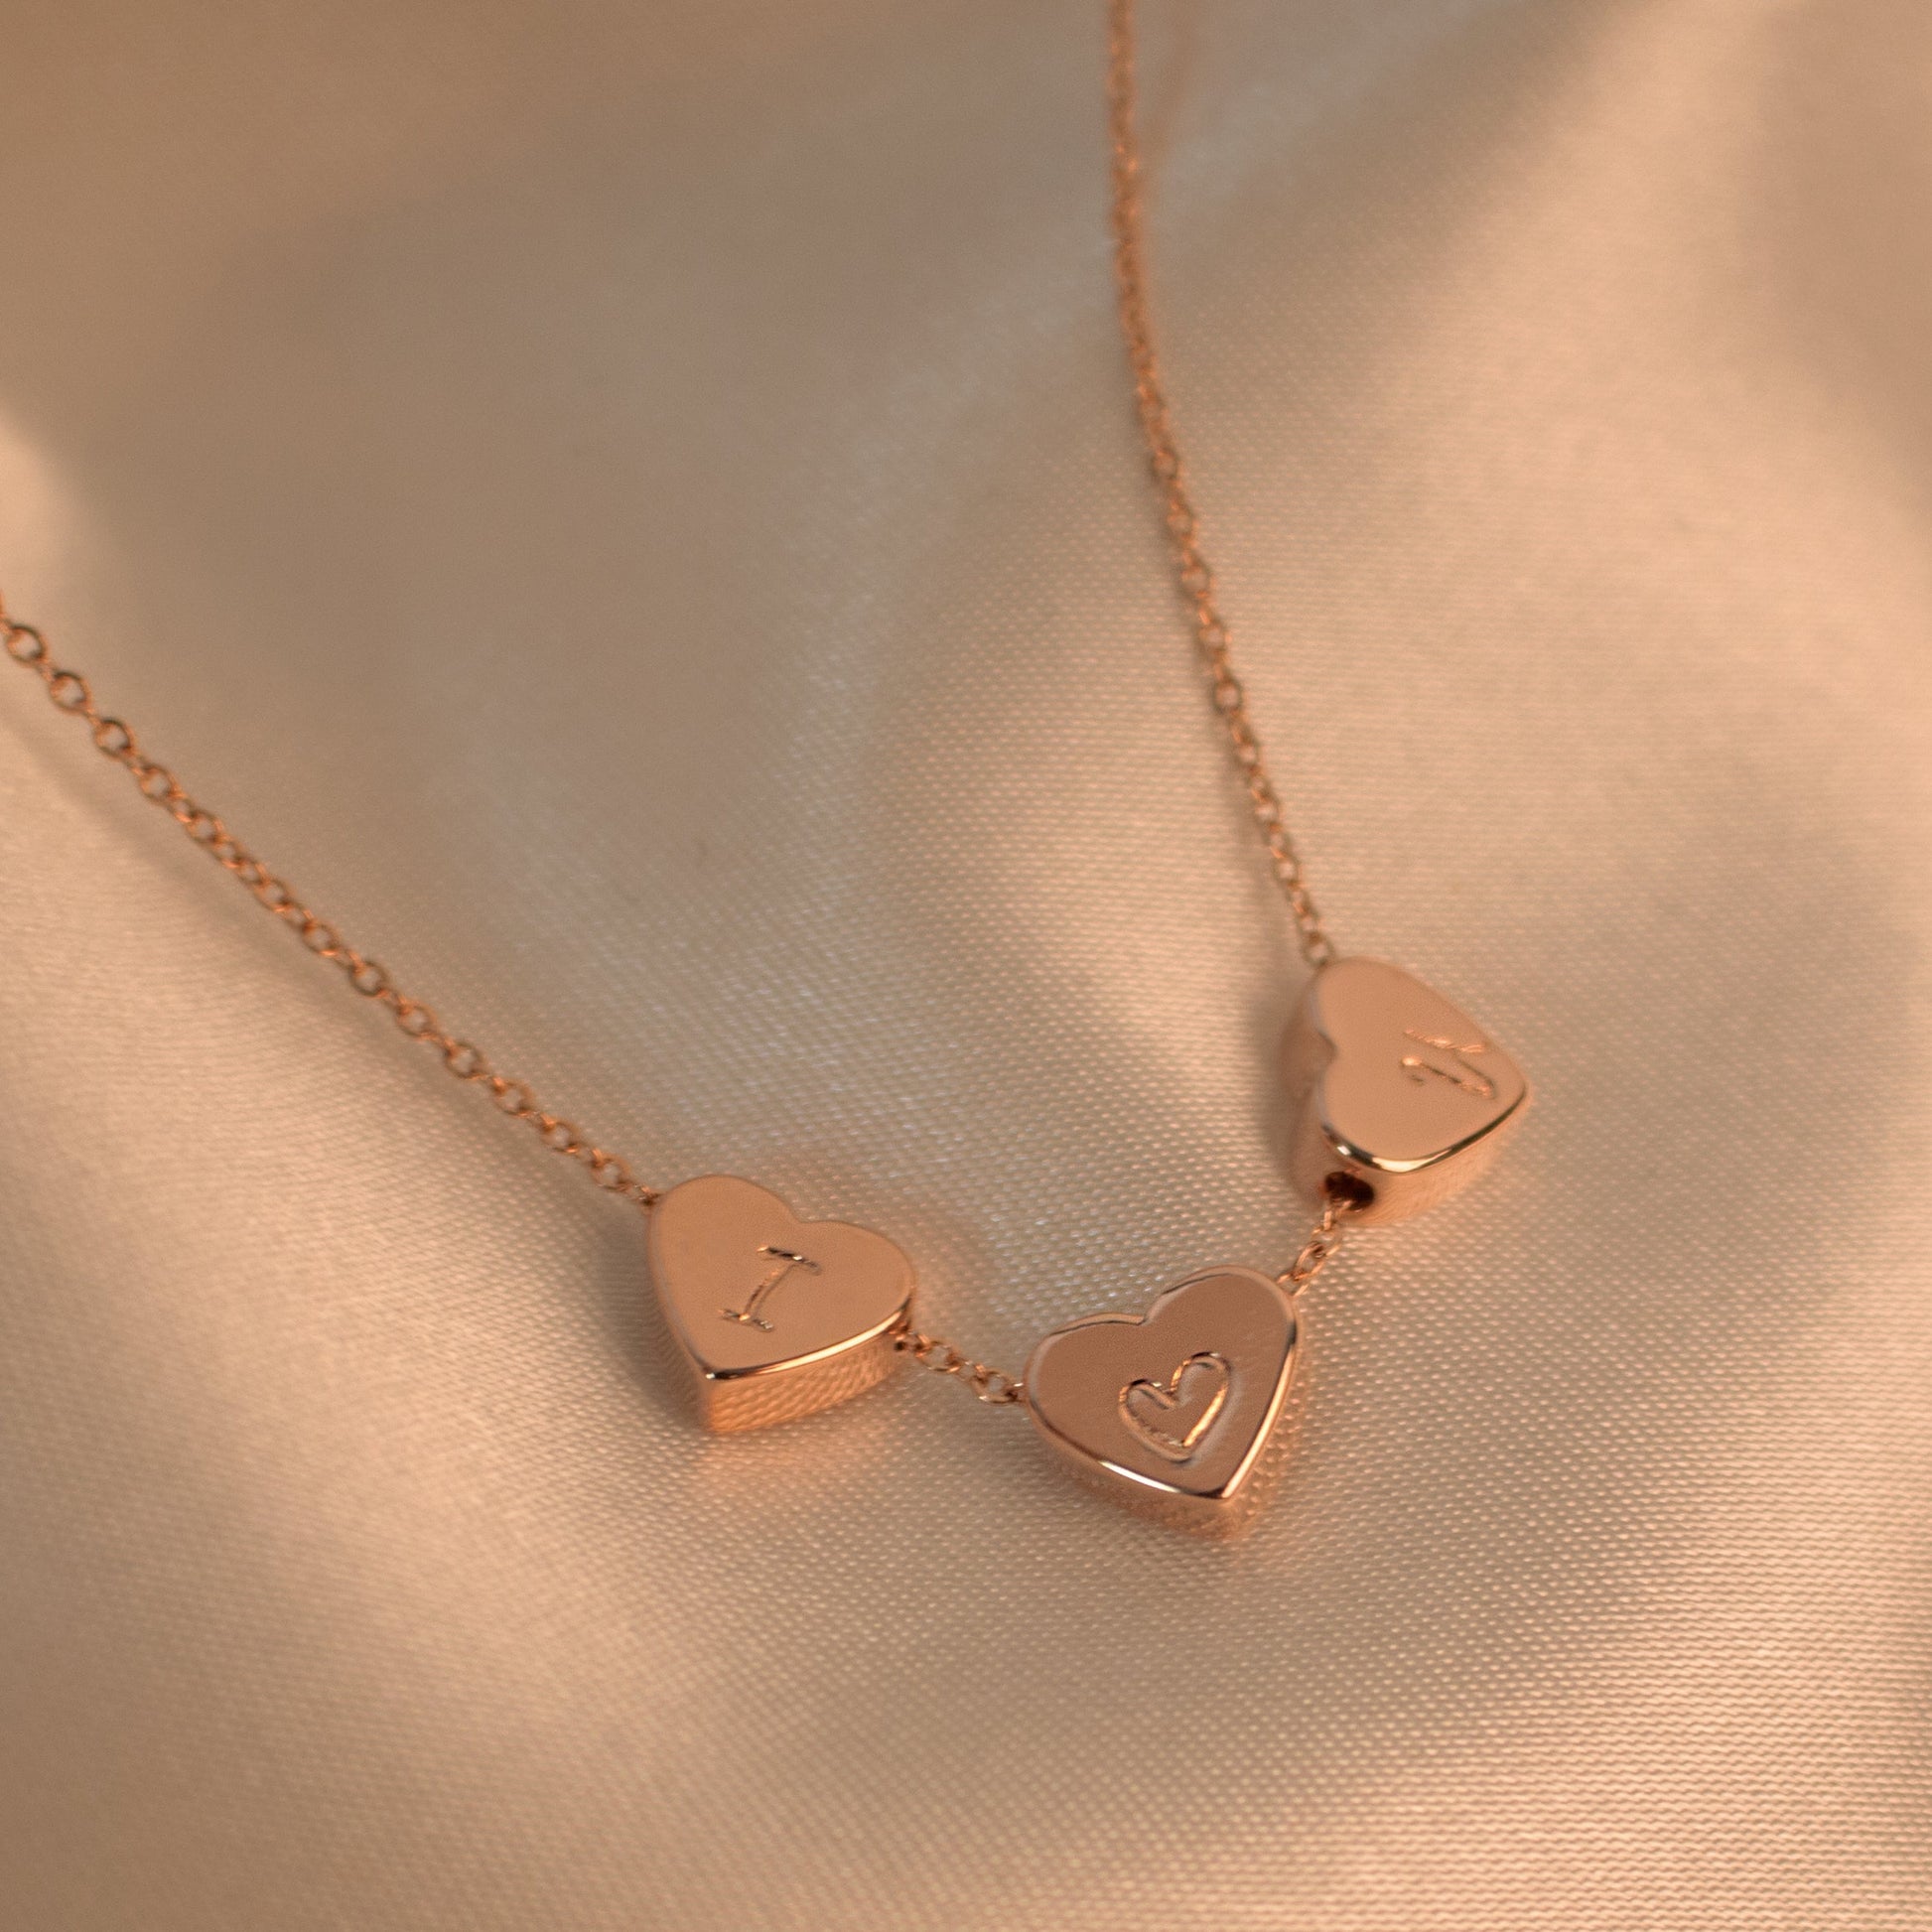 Buy Heart Charm Initial Necklace - Personalized Jewelry at Petite Boutique